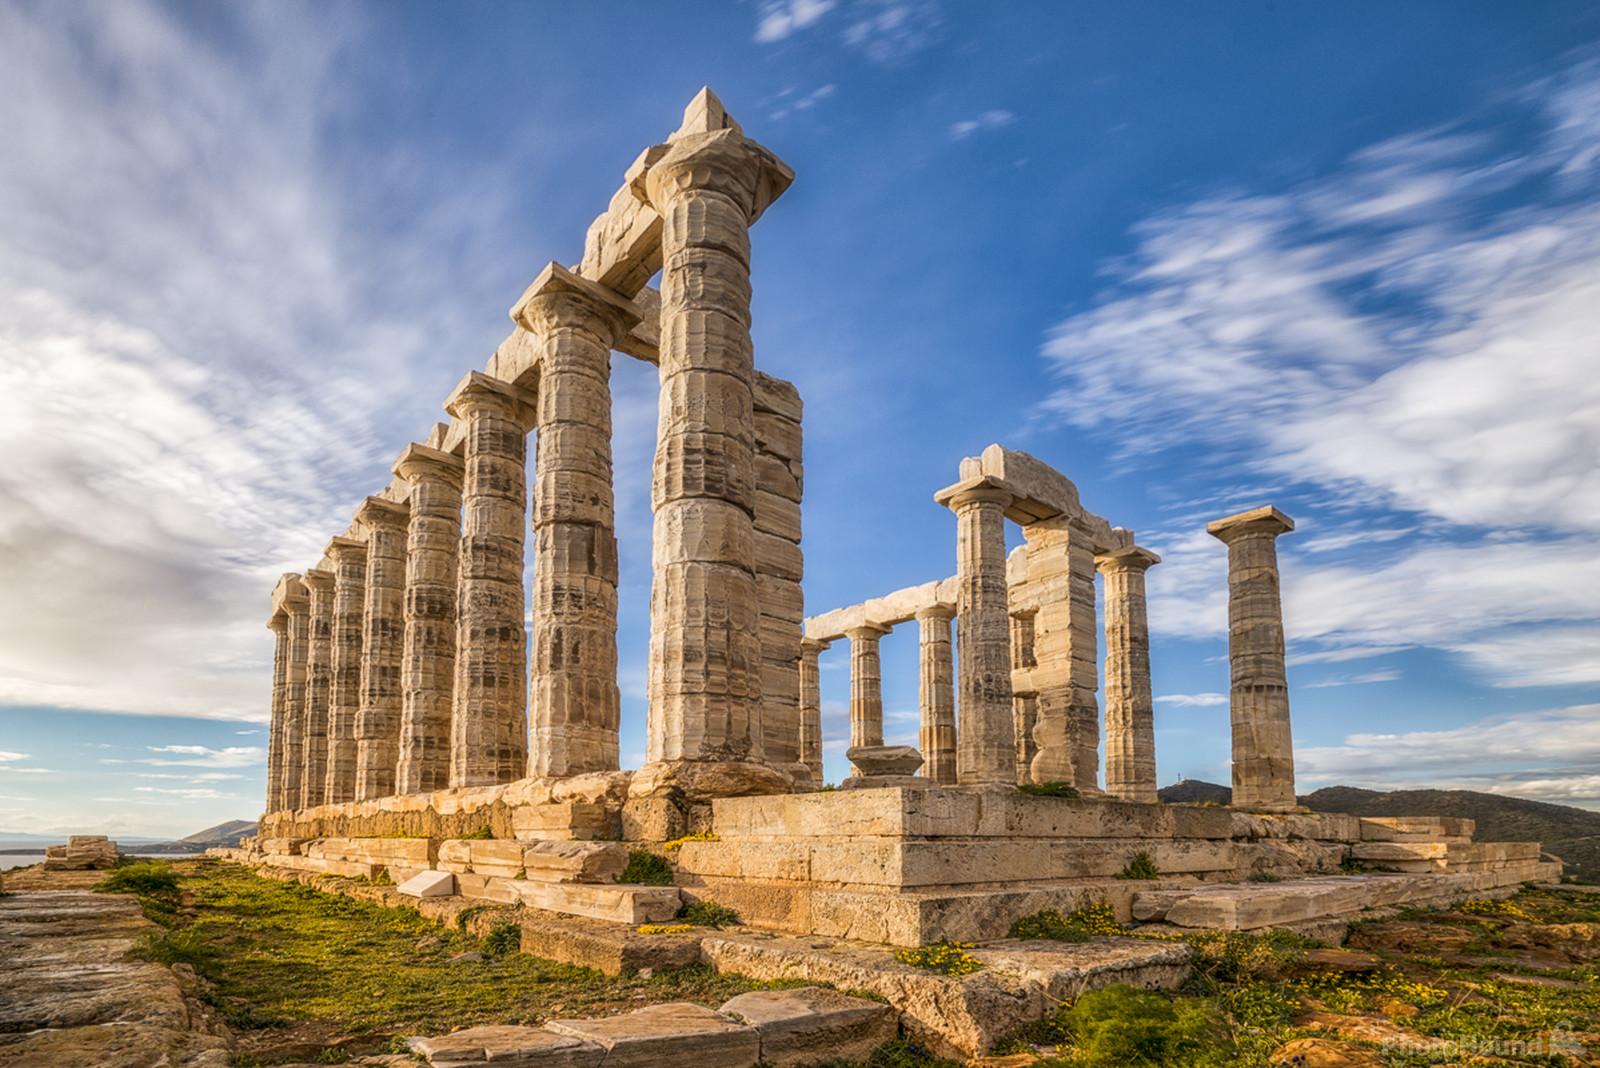 Image of Temple of Poseidon - Sounion by James Billings.